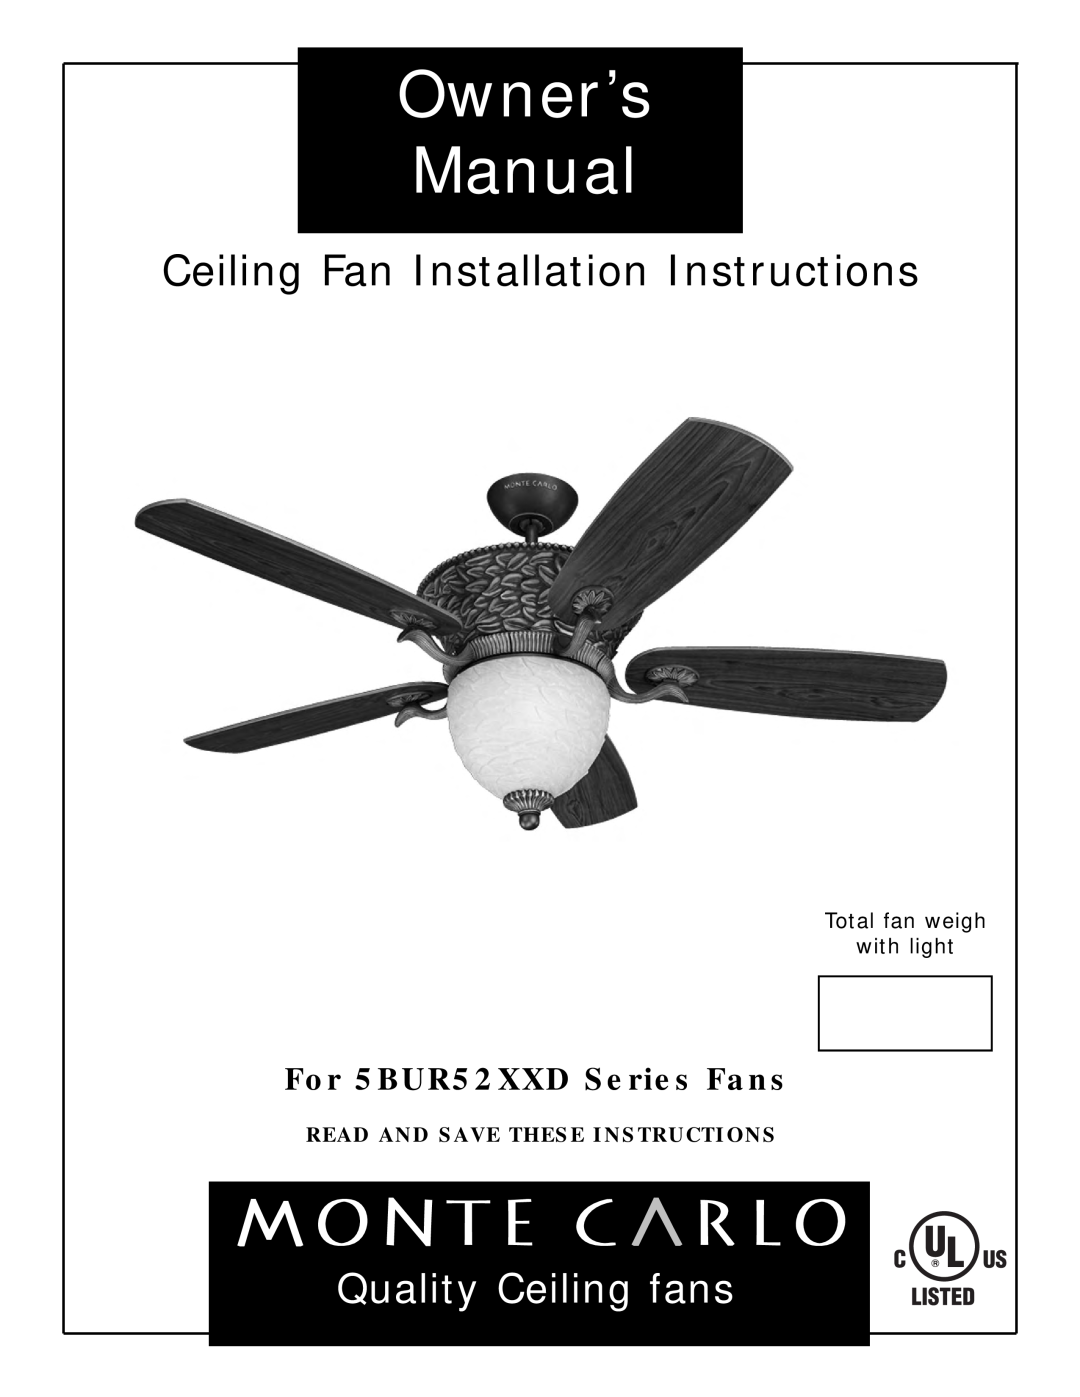 Monte Carlo Fan Company 5BUR52XXD Series owner manual Ceiling Fan Installation Instructions, Quality Ceiling fans 